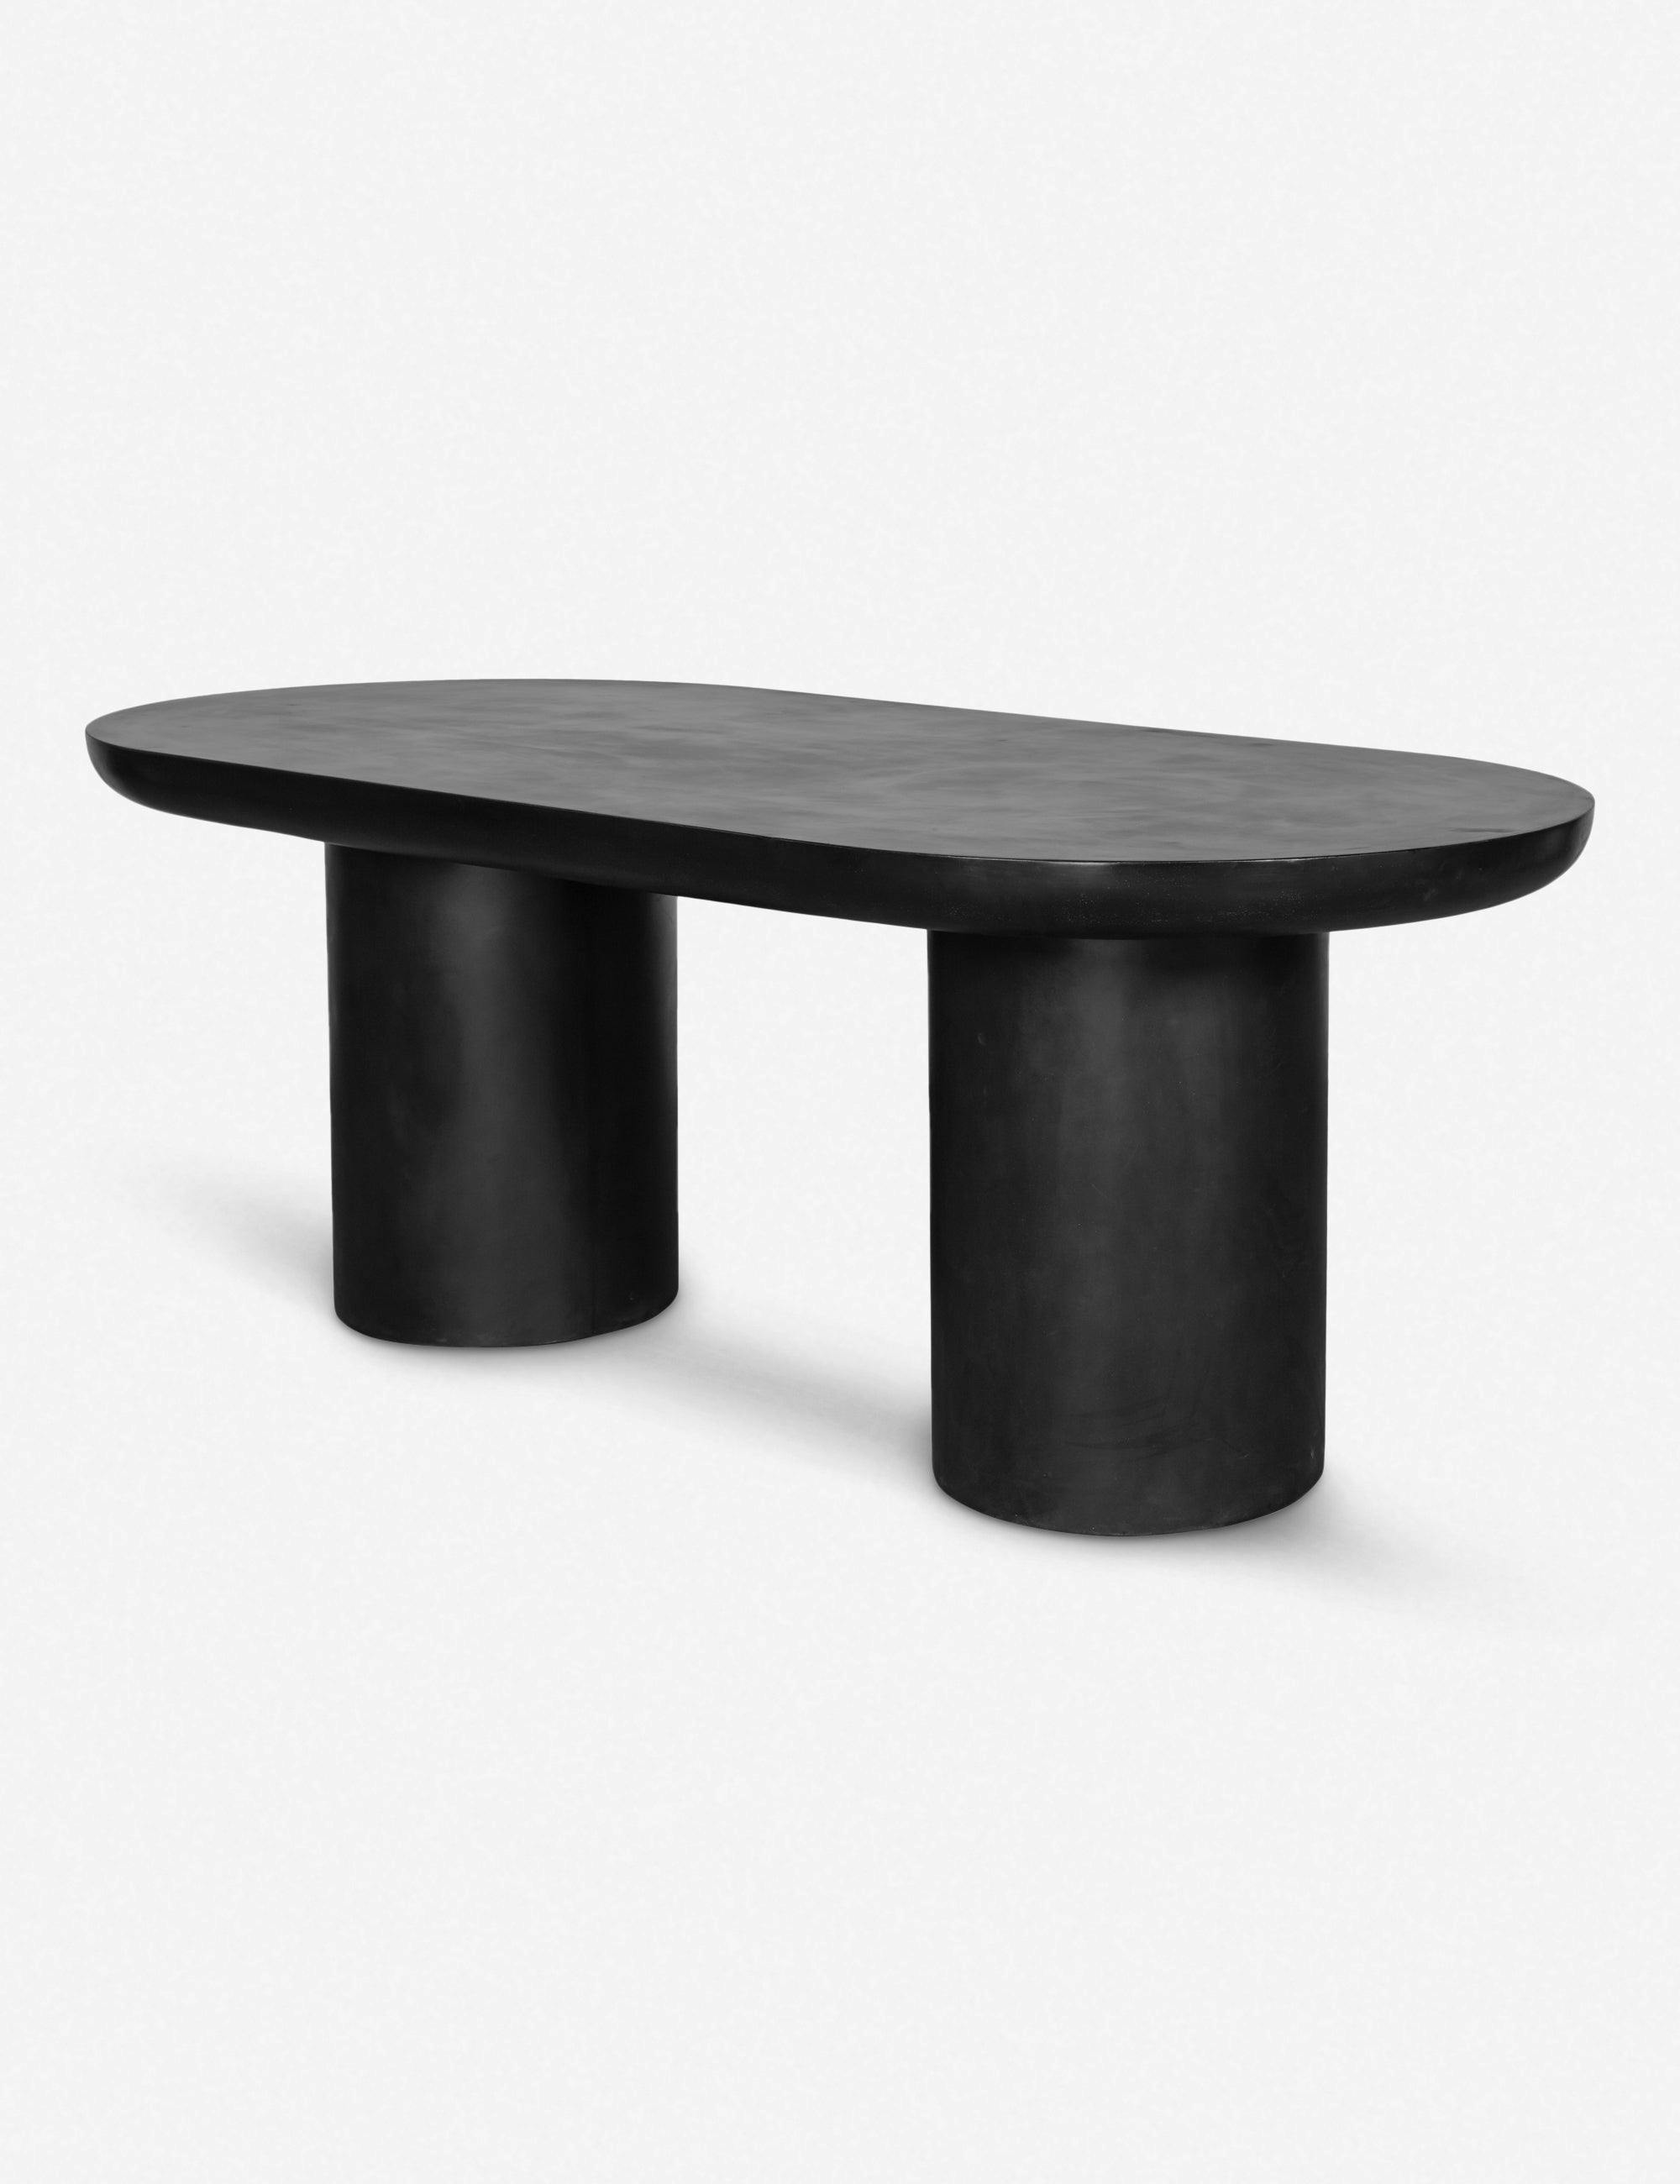 Rocca Black Fiber-Reinforced Concrete 6-Seater Oval Dining Table